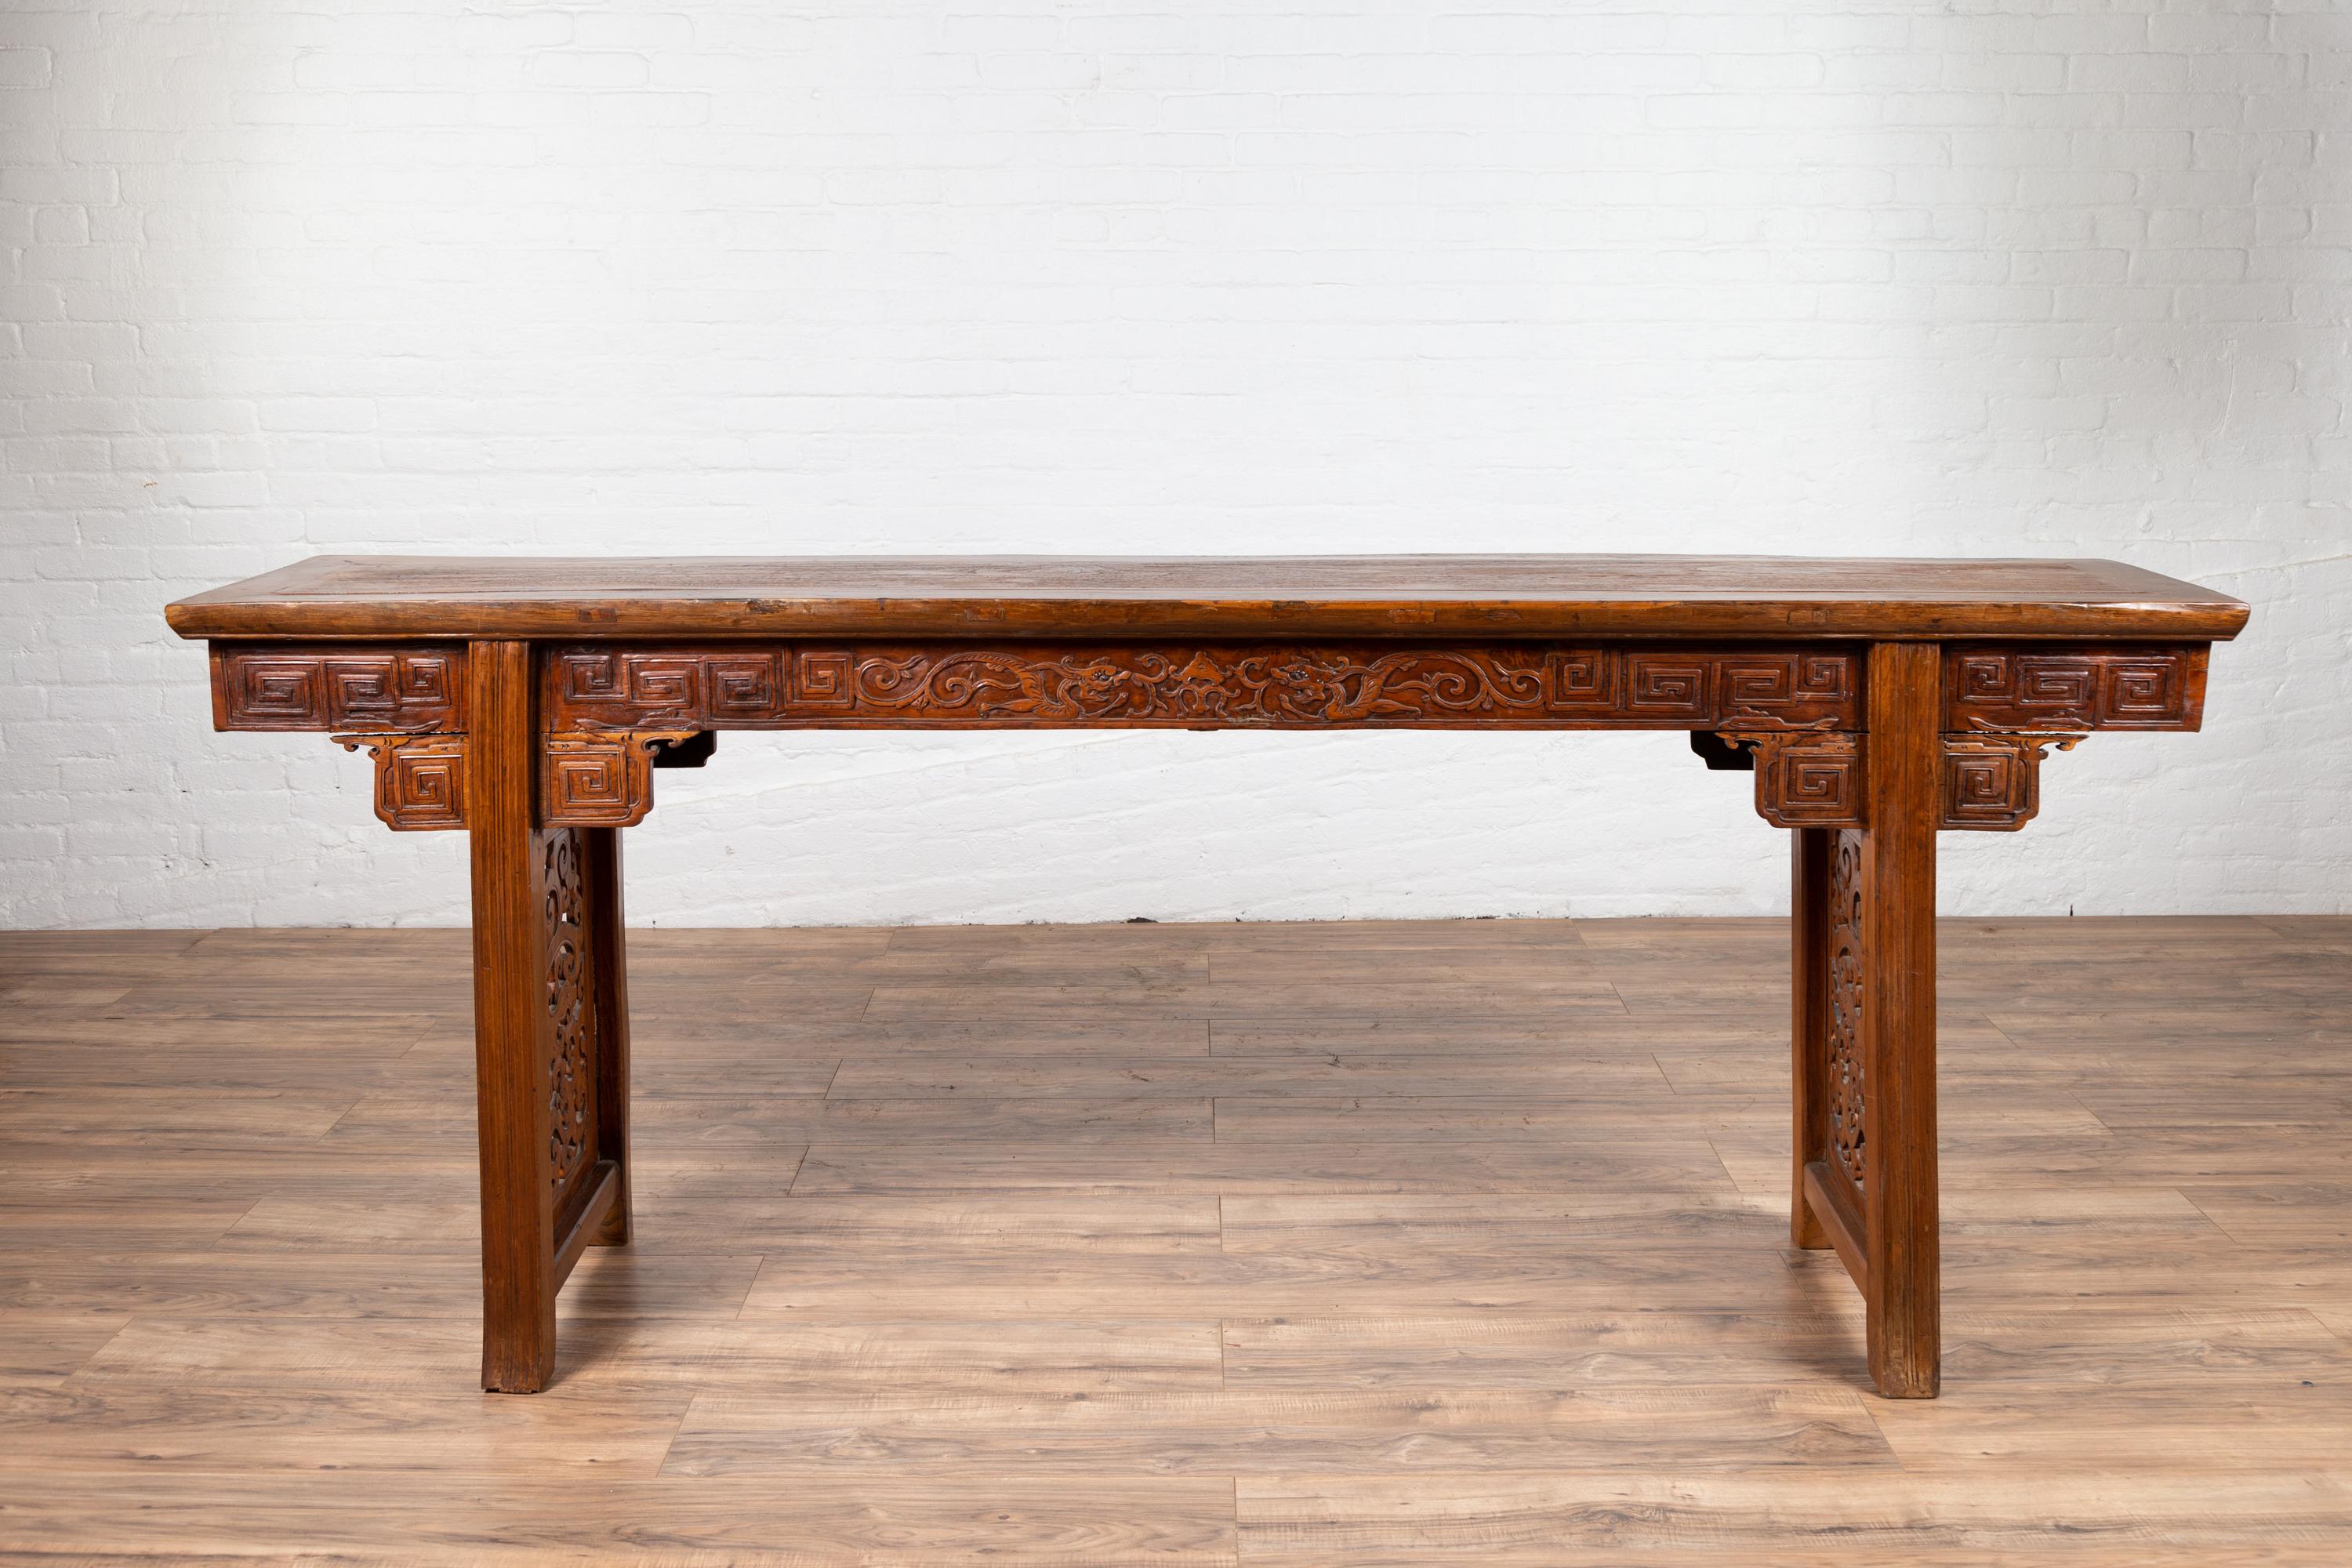 An antique Chinese tall altar console table from the early 20th century with scrollwork and pierced motifs. Born in China during the early years of the 20th century, this stunning console table charms us with its exquisitely carved decor. Featuring